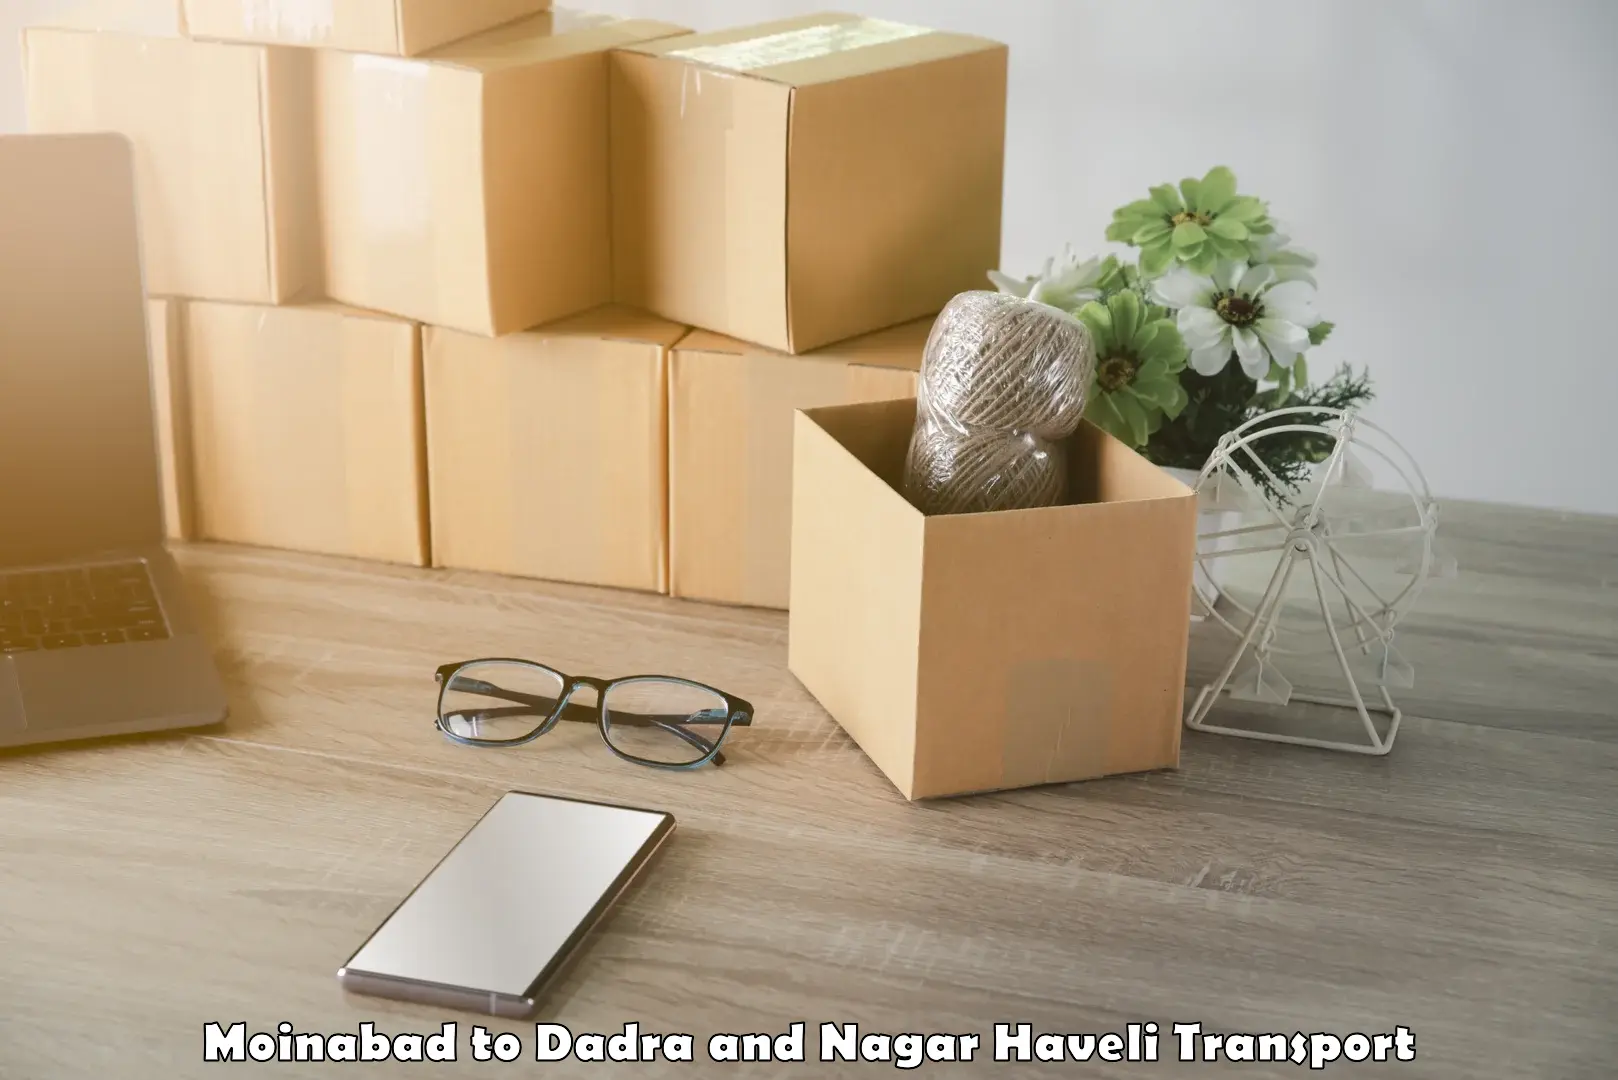 Nationwide transport services Moinabad to Dadra and Nagar Haveli